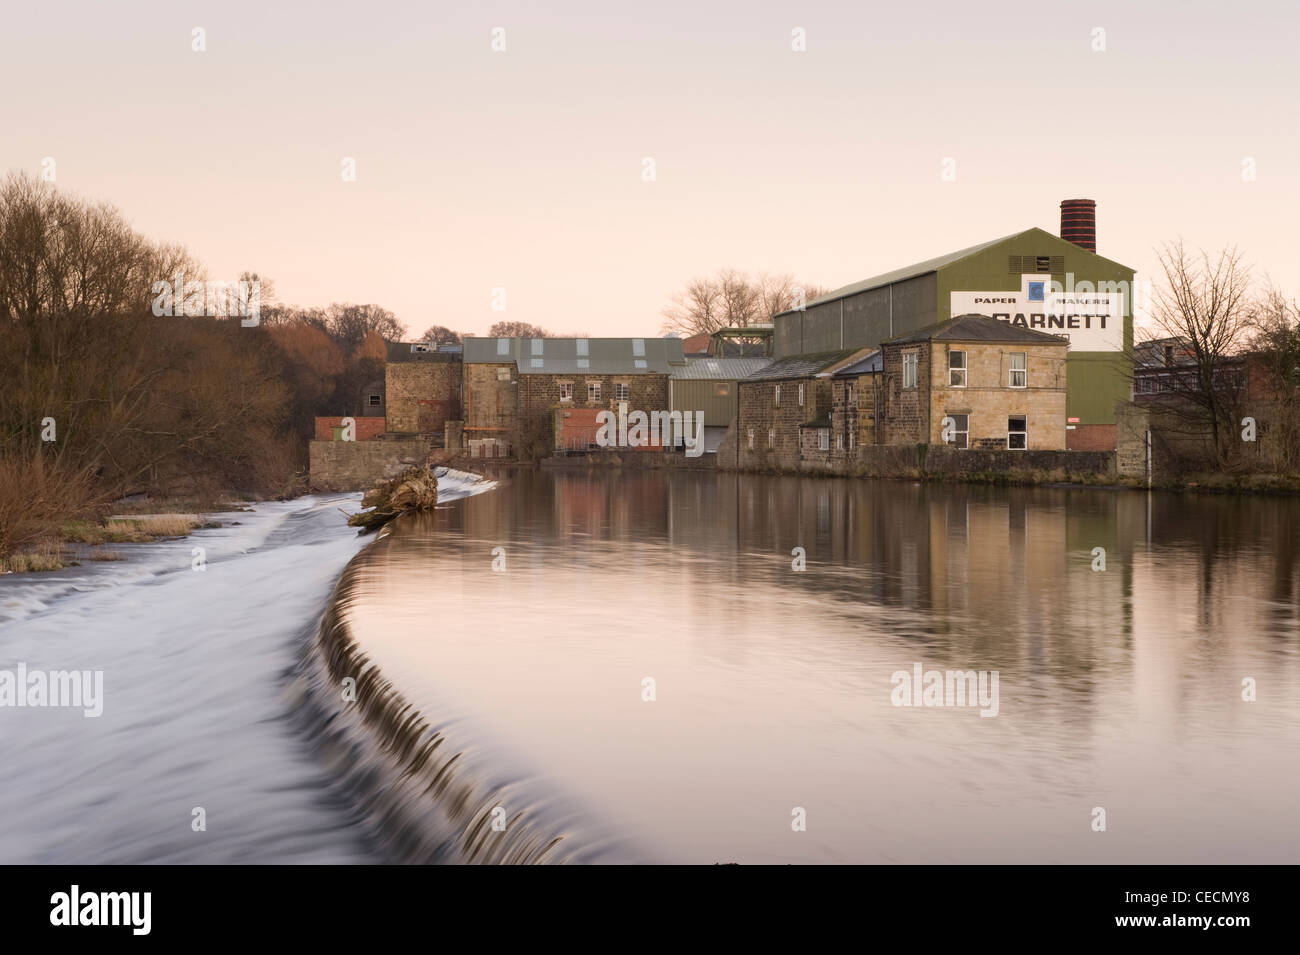 River Wharfe water gently flowing & cascading over weir under sunset sky, historic Garnett's paper mill beyond - Otley, West Yorkshire, England, UK. Stock Photo